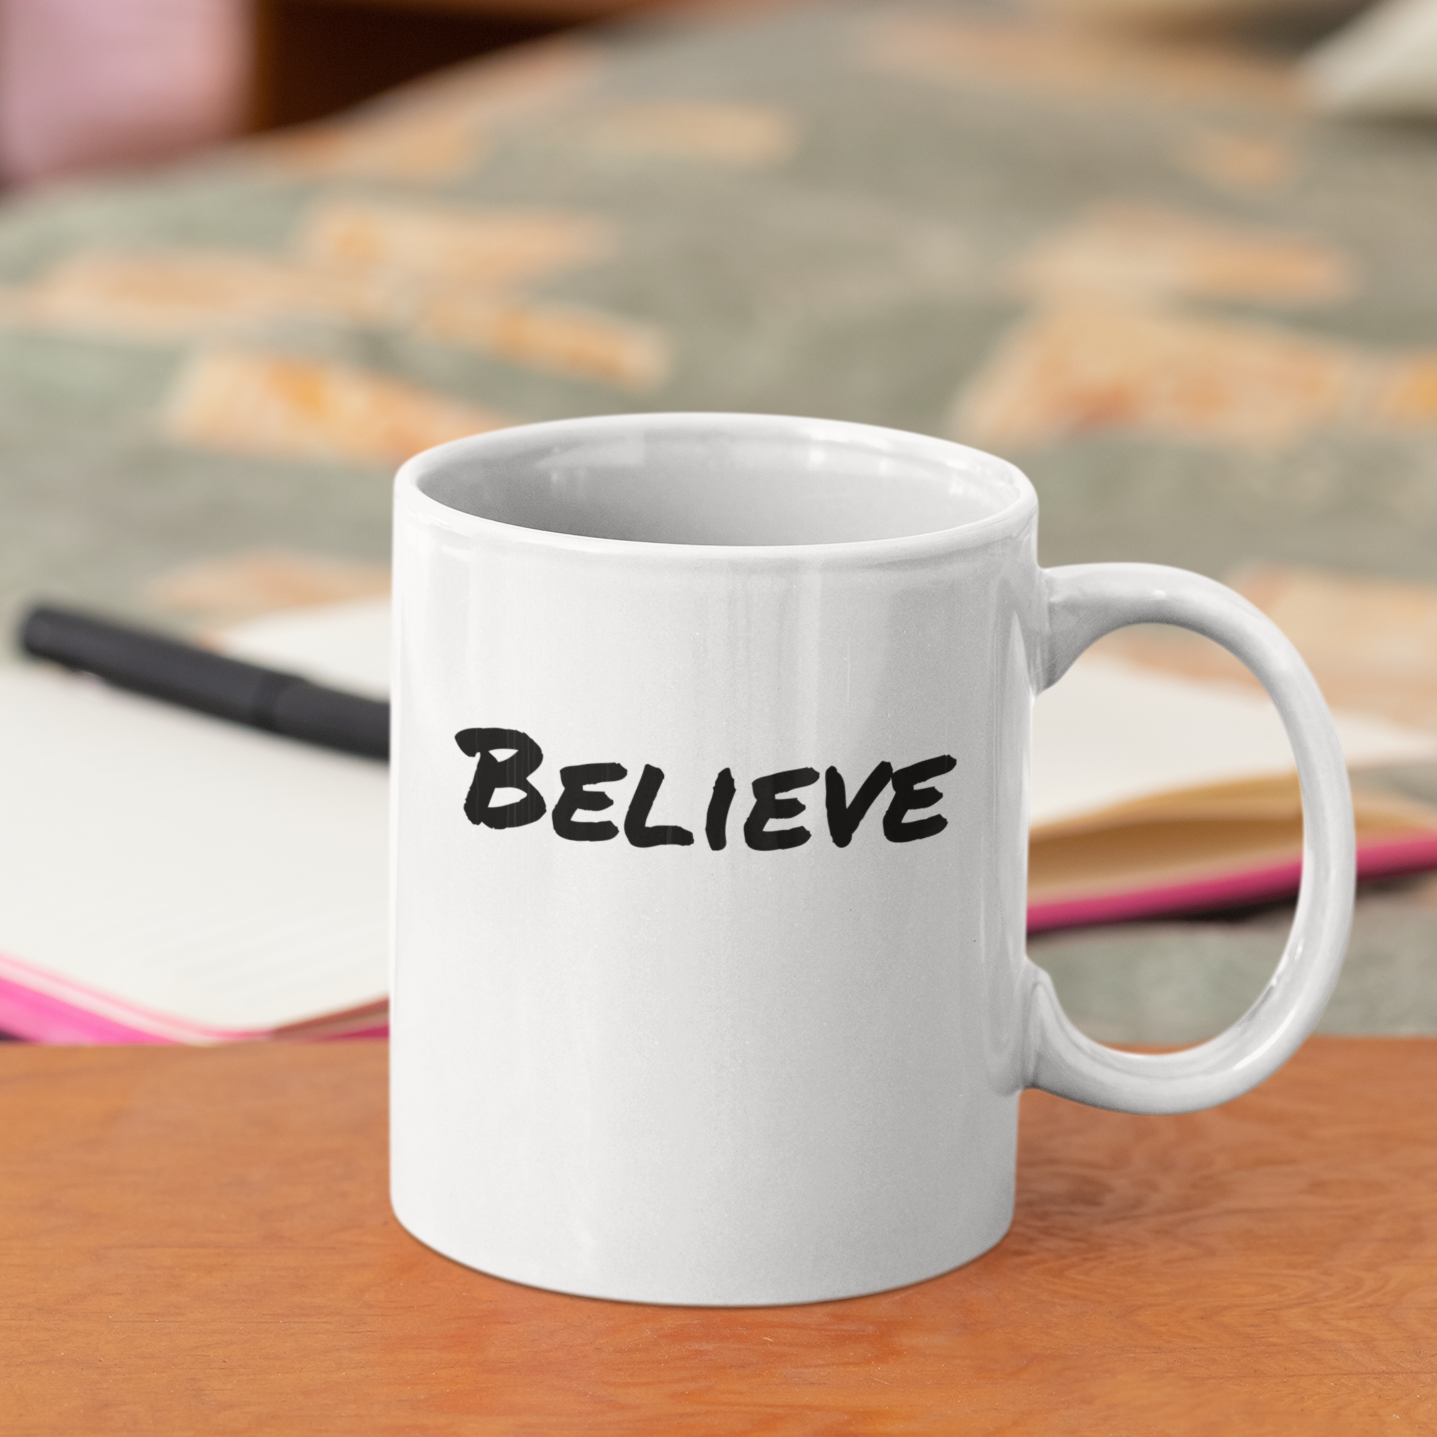 The mug positive vibes with the words of encouragement - Believe